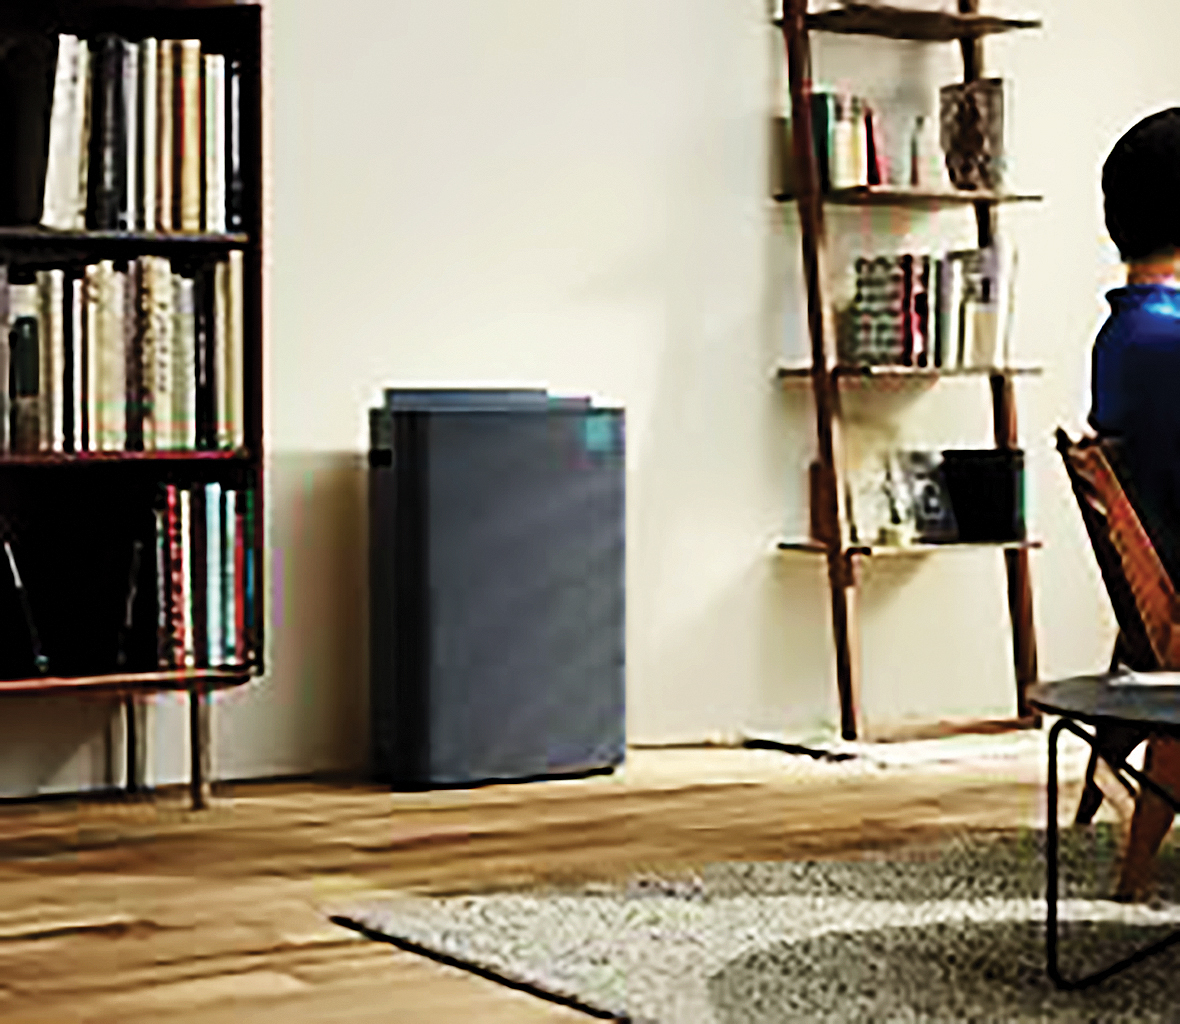 Are air purifiers effective?